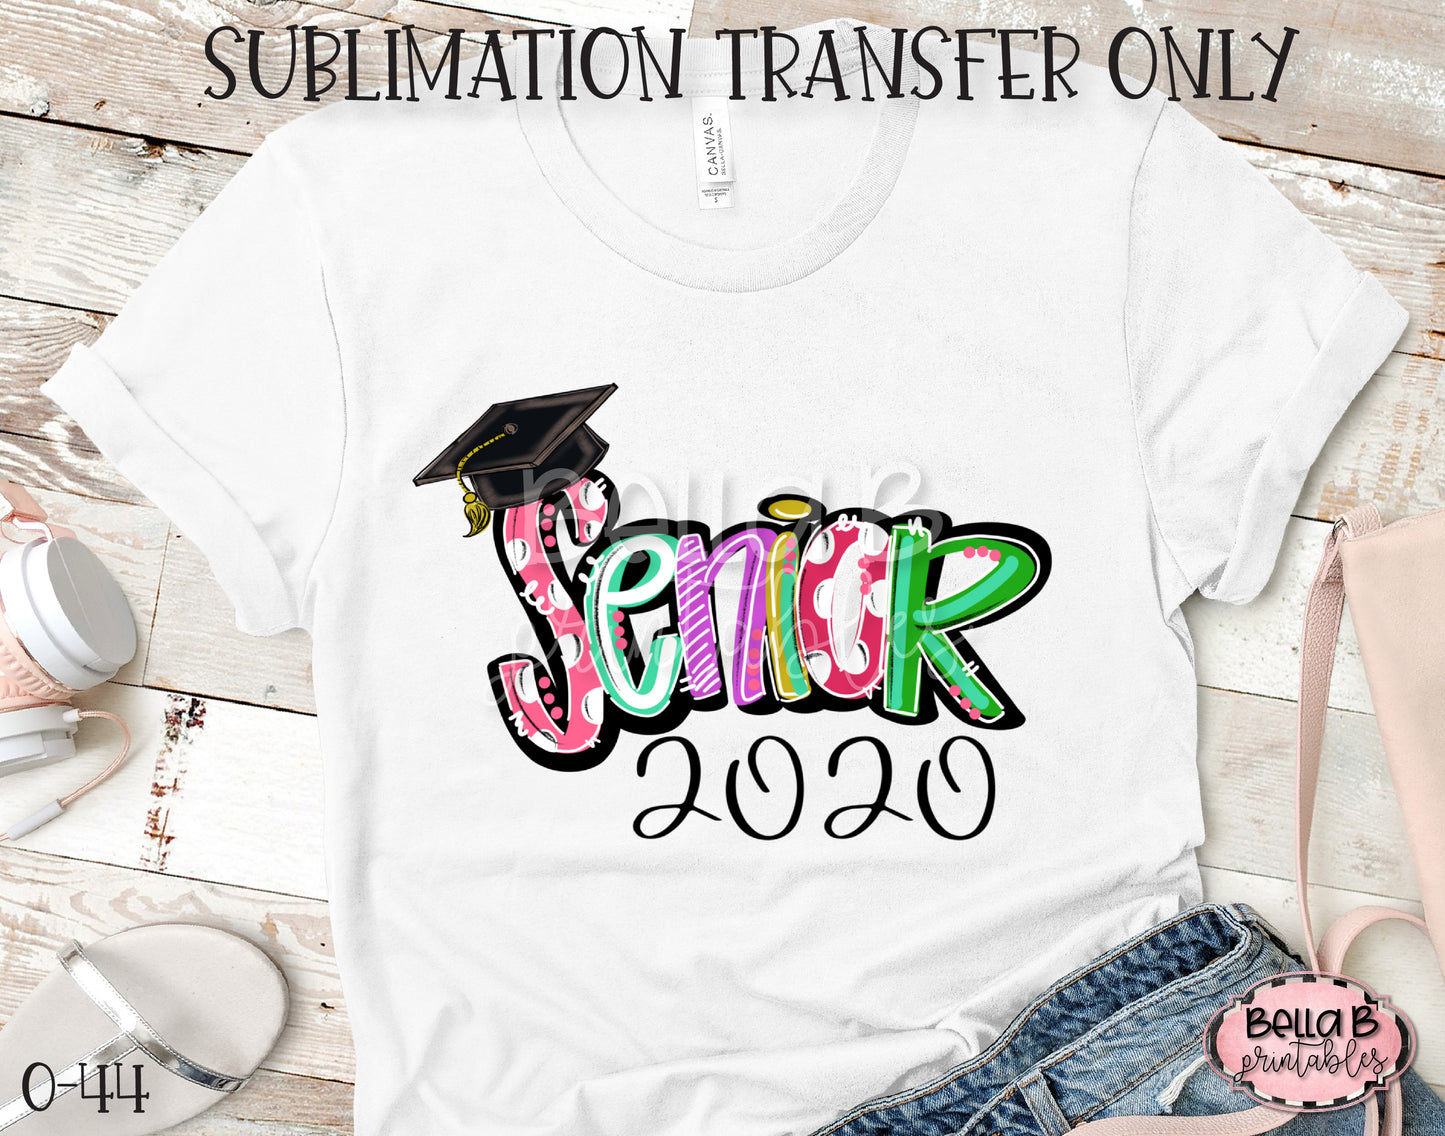 Senior Class of 2020 Sublimation Transfer, Ready To Press, Heat Press Transfer, Sublimation Print